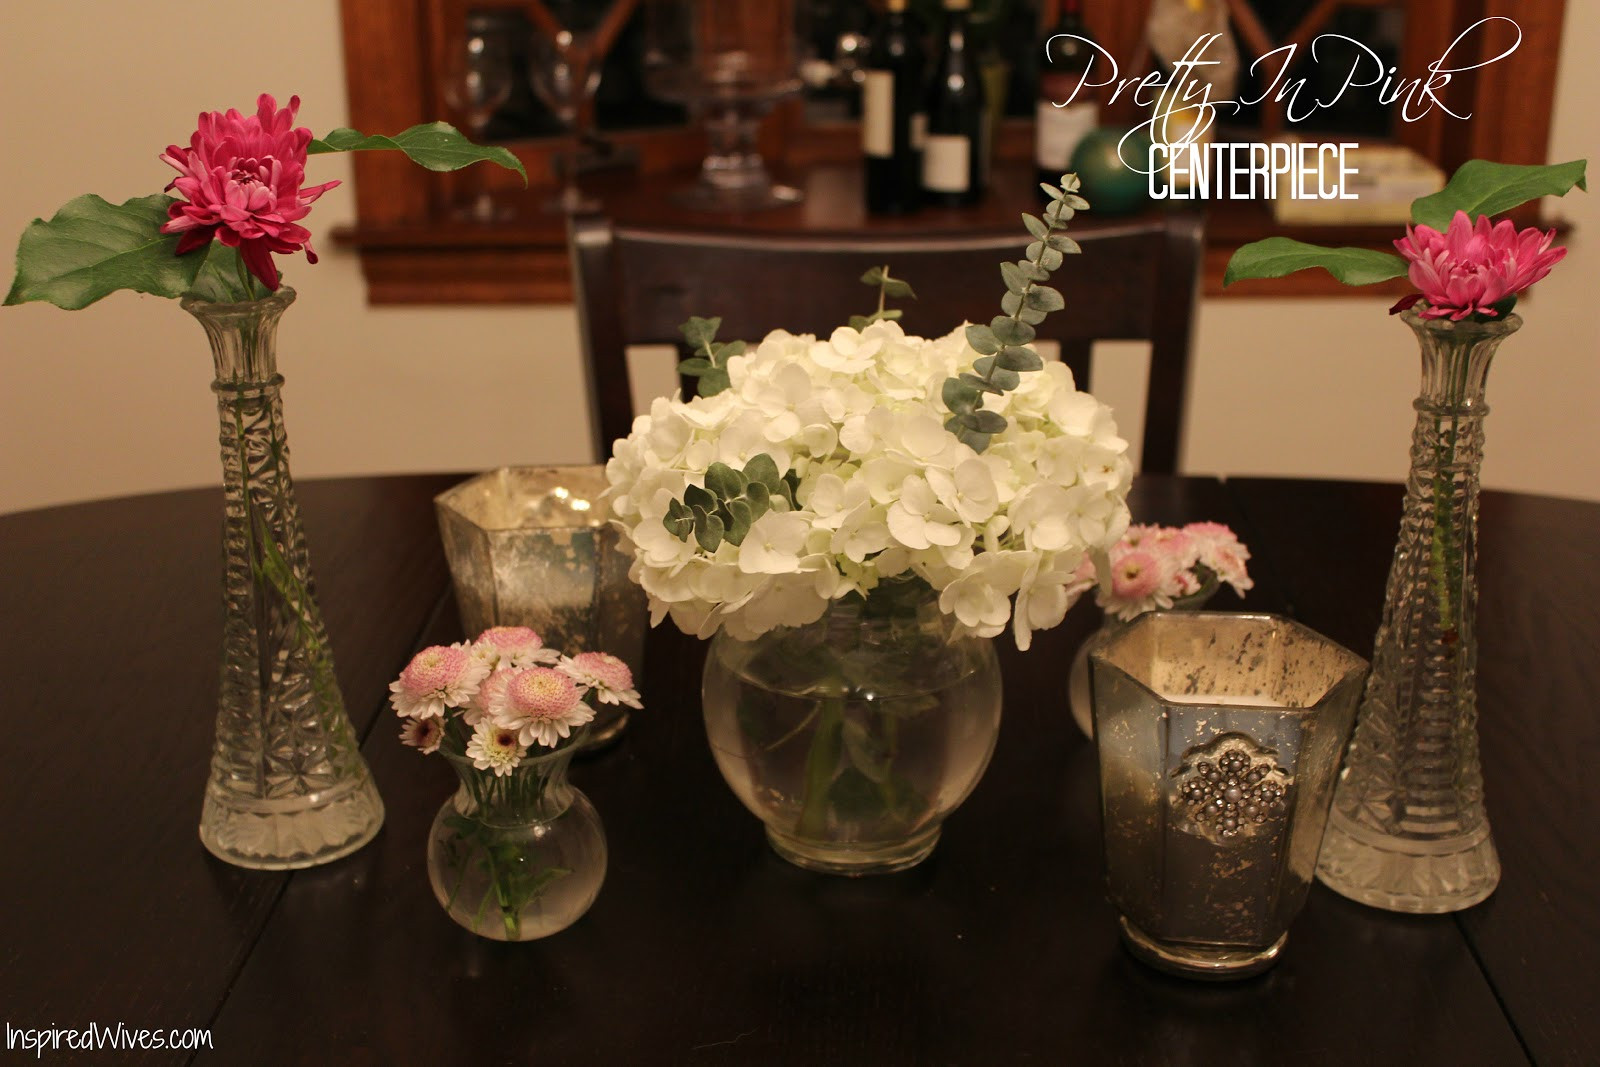 Centerpiece Ideas For Dinner Party
 Inspired I Dos 7 Dinner Party Centerpiece Ideas